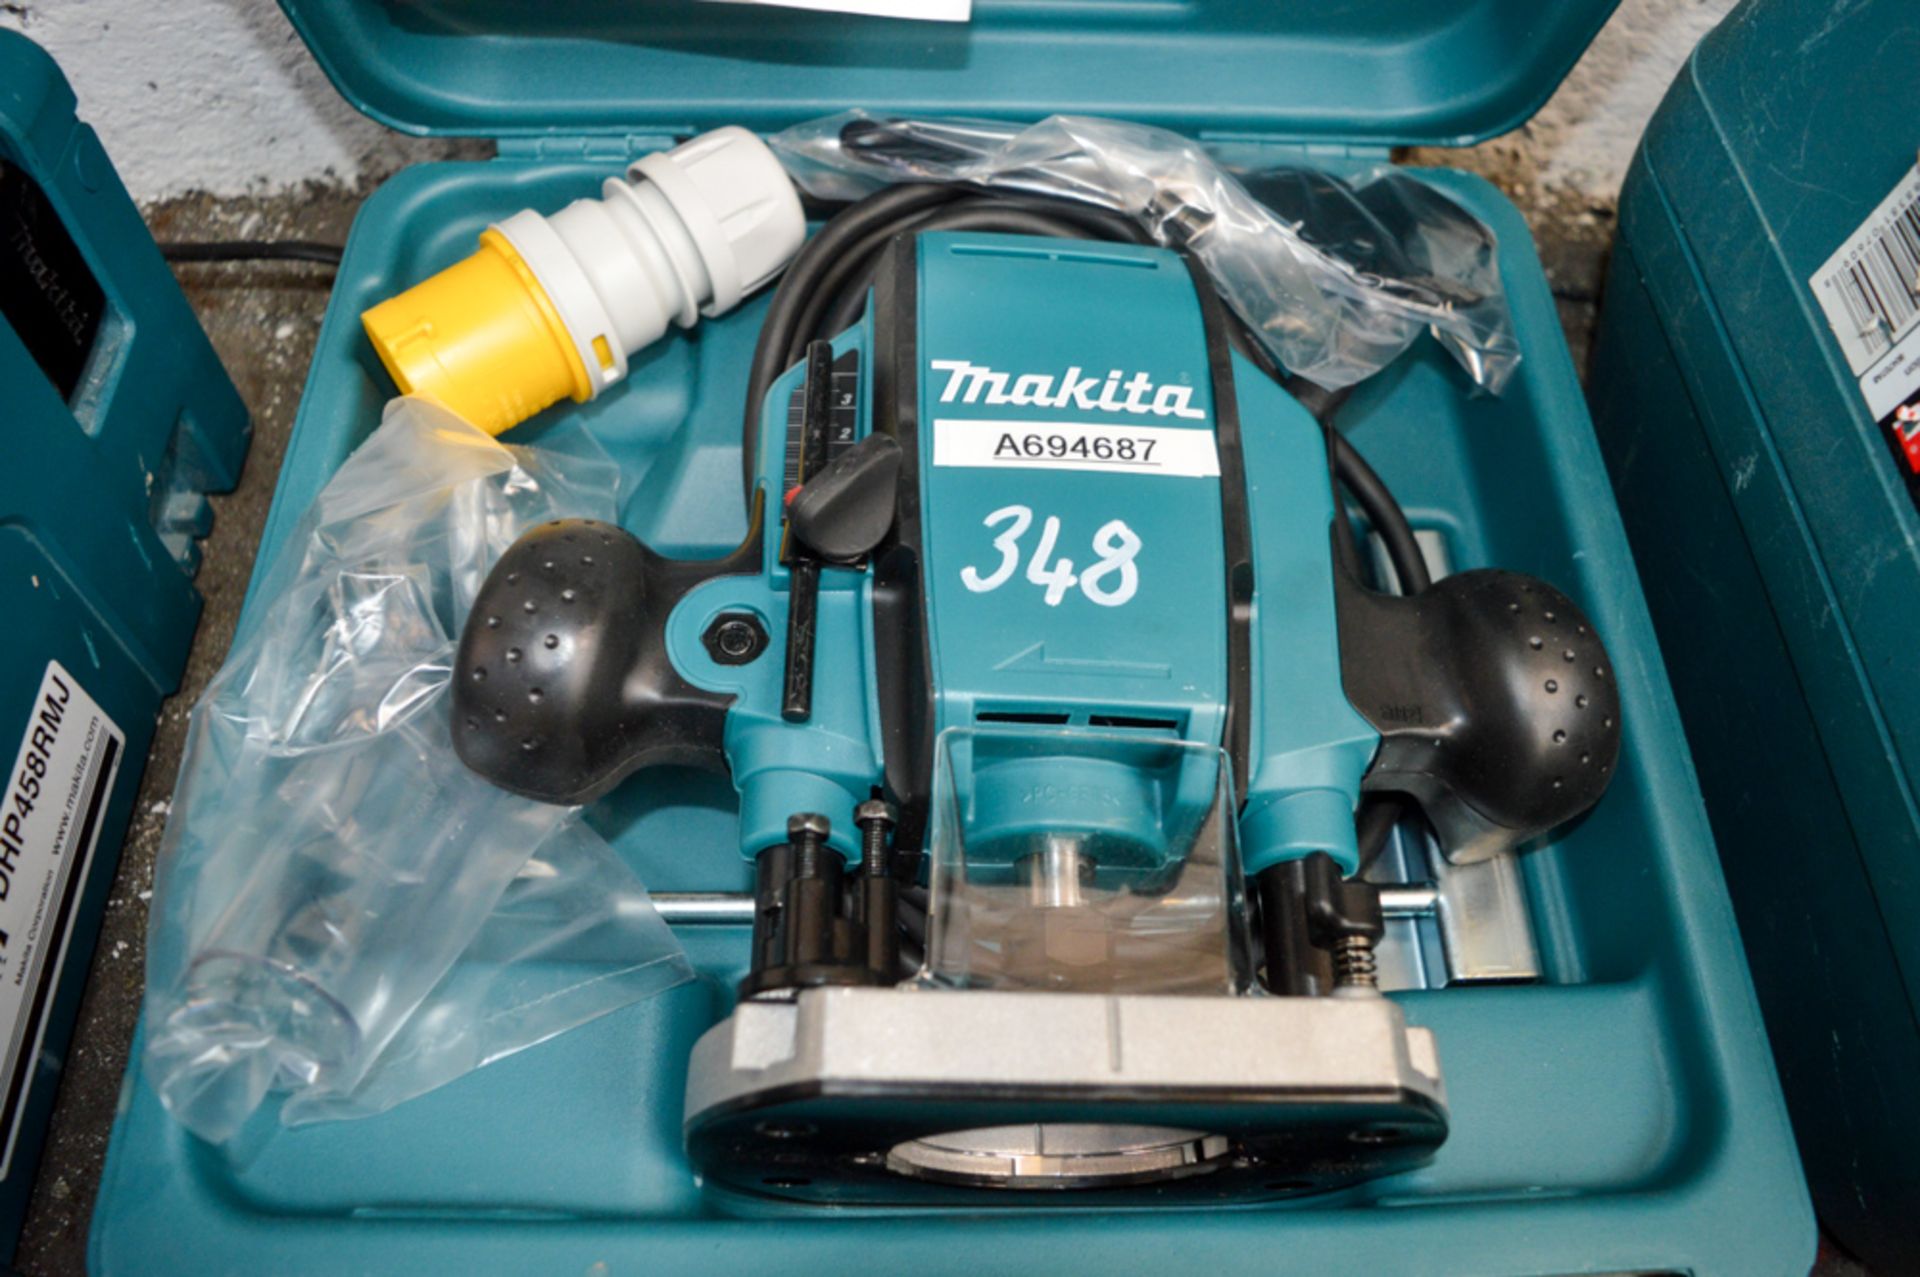 Makita 110v router c/w carry case A694687